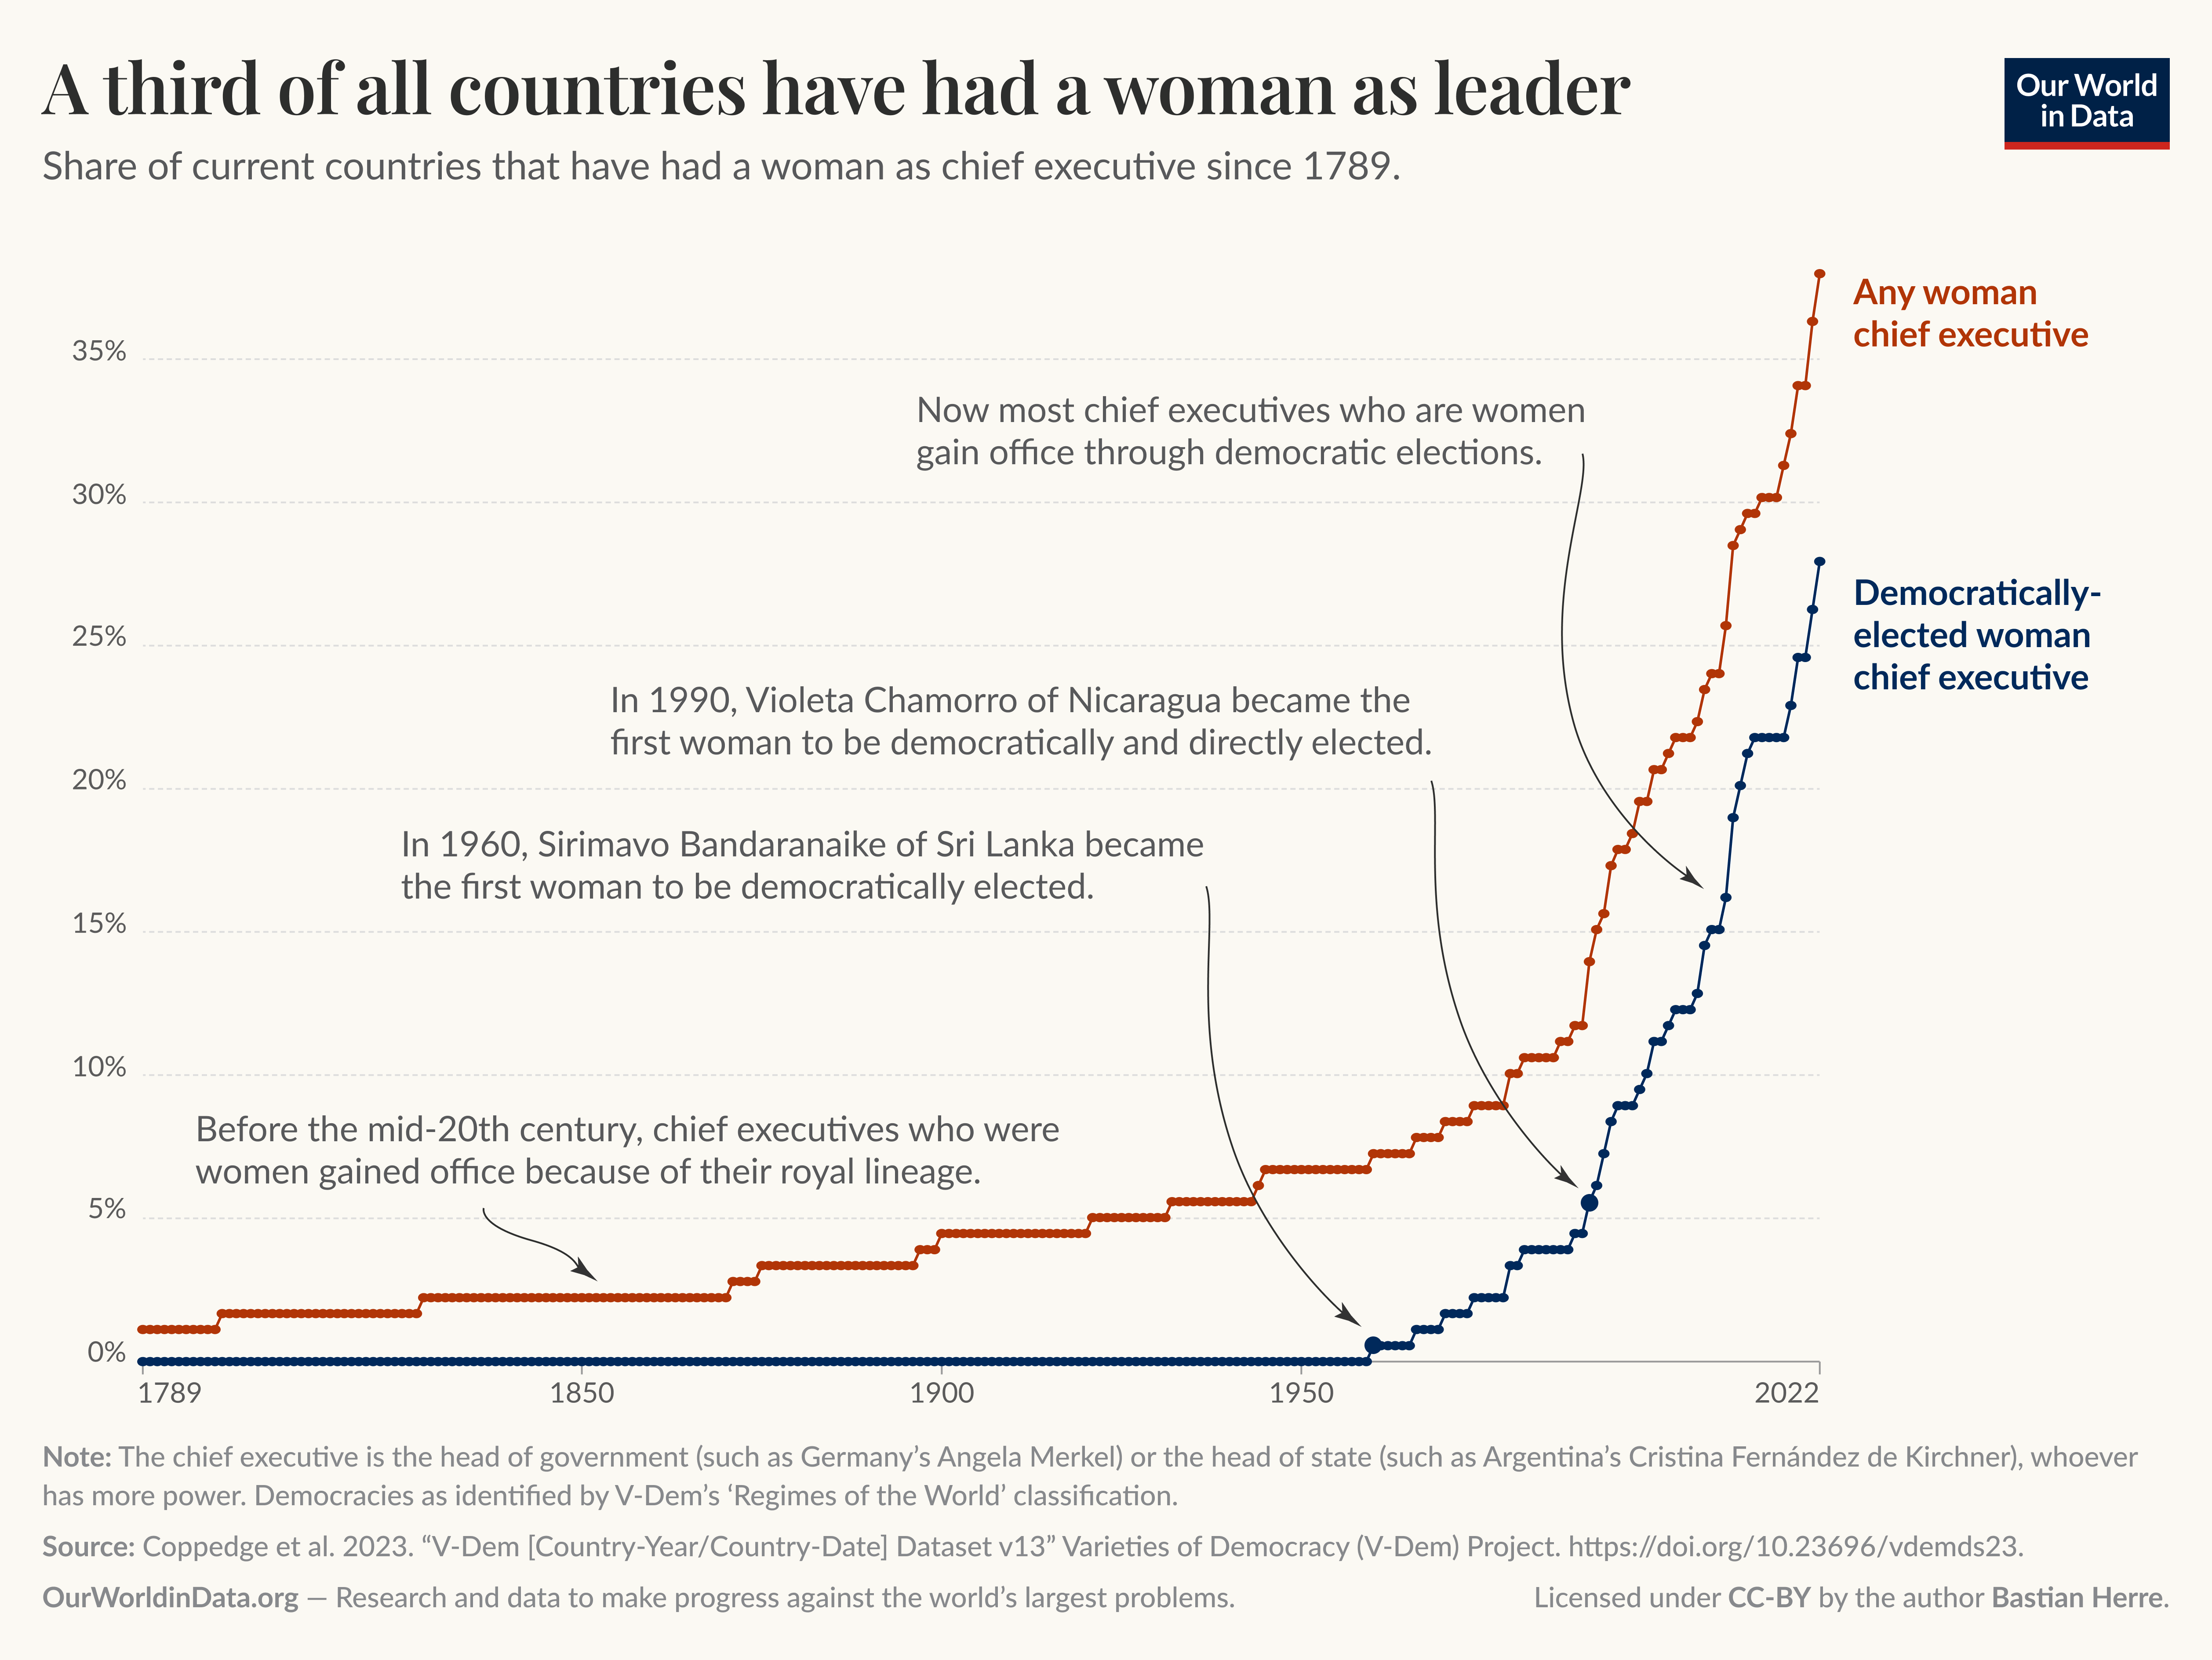 Line chart showing that the share of countries that ever had a woman as chief executives has increased a lot since the middle of the 20th century, driven by democratically-elected women chief executives.